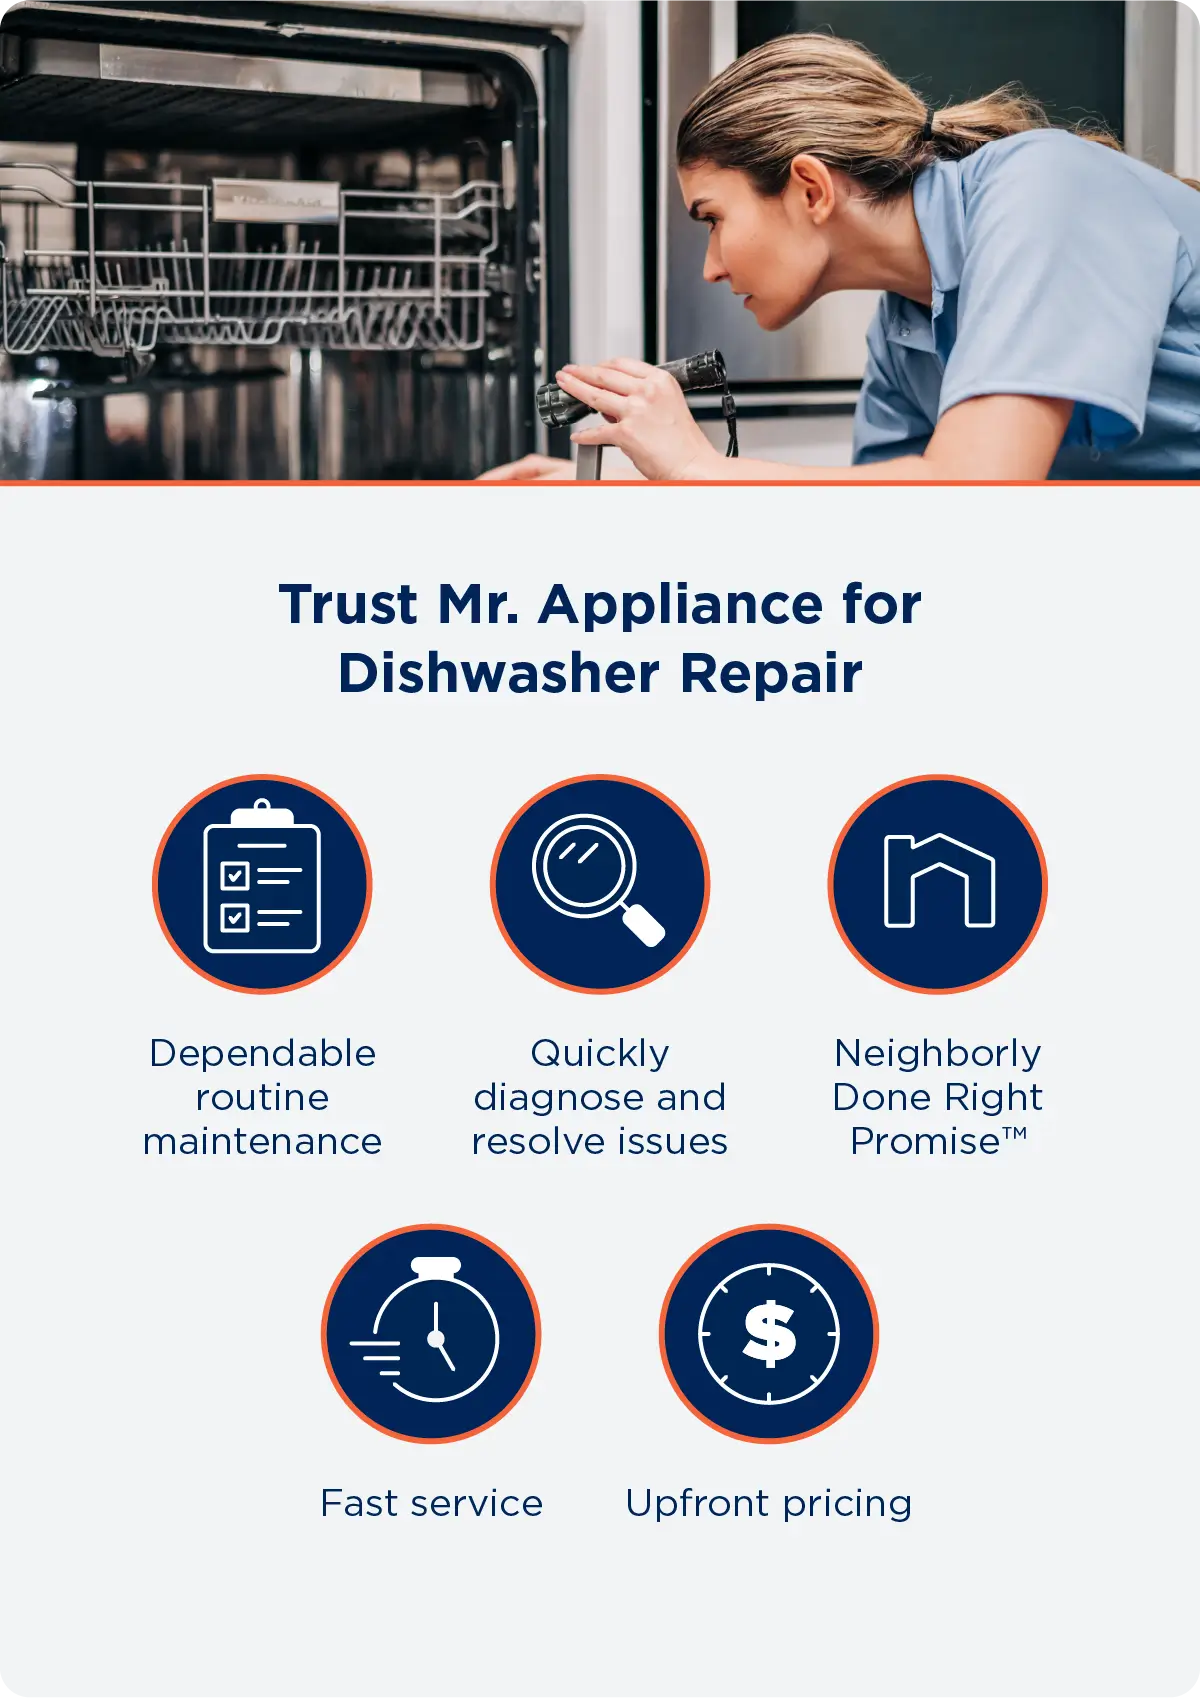 Features of Mr. Appliance dishwasher repair services with accompanying icons.